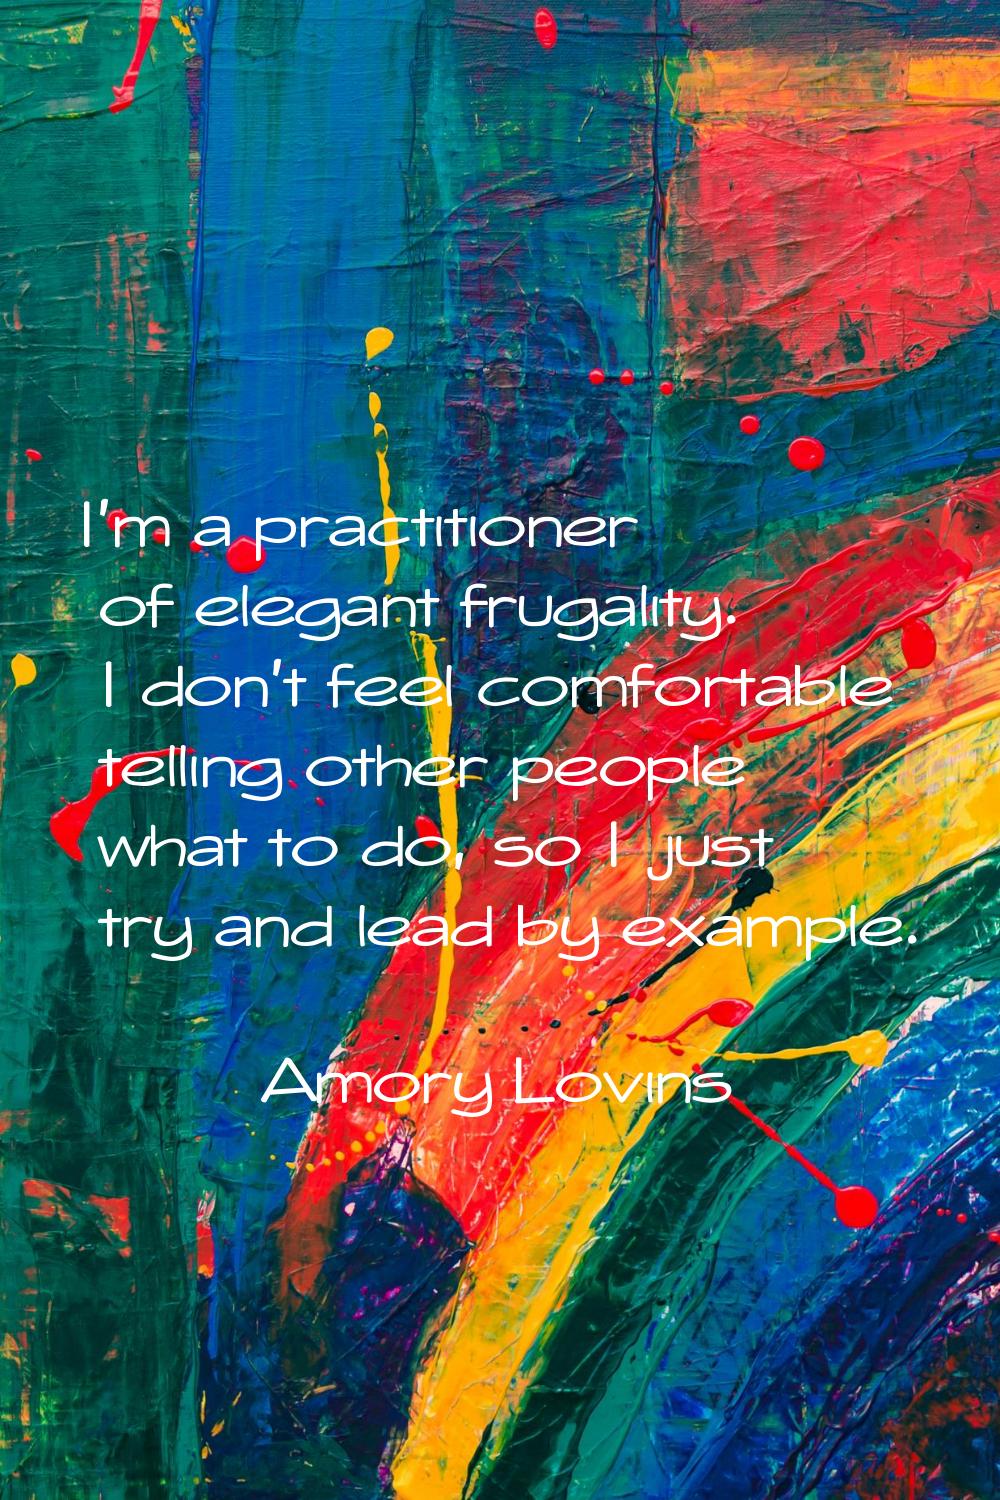 I'm a practitioner of elegant frugality. I don't feel comfortable telling other people what to do, 